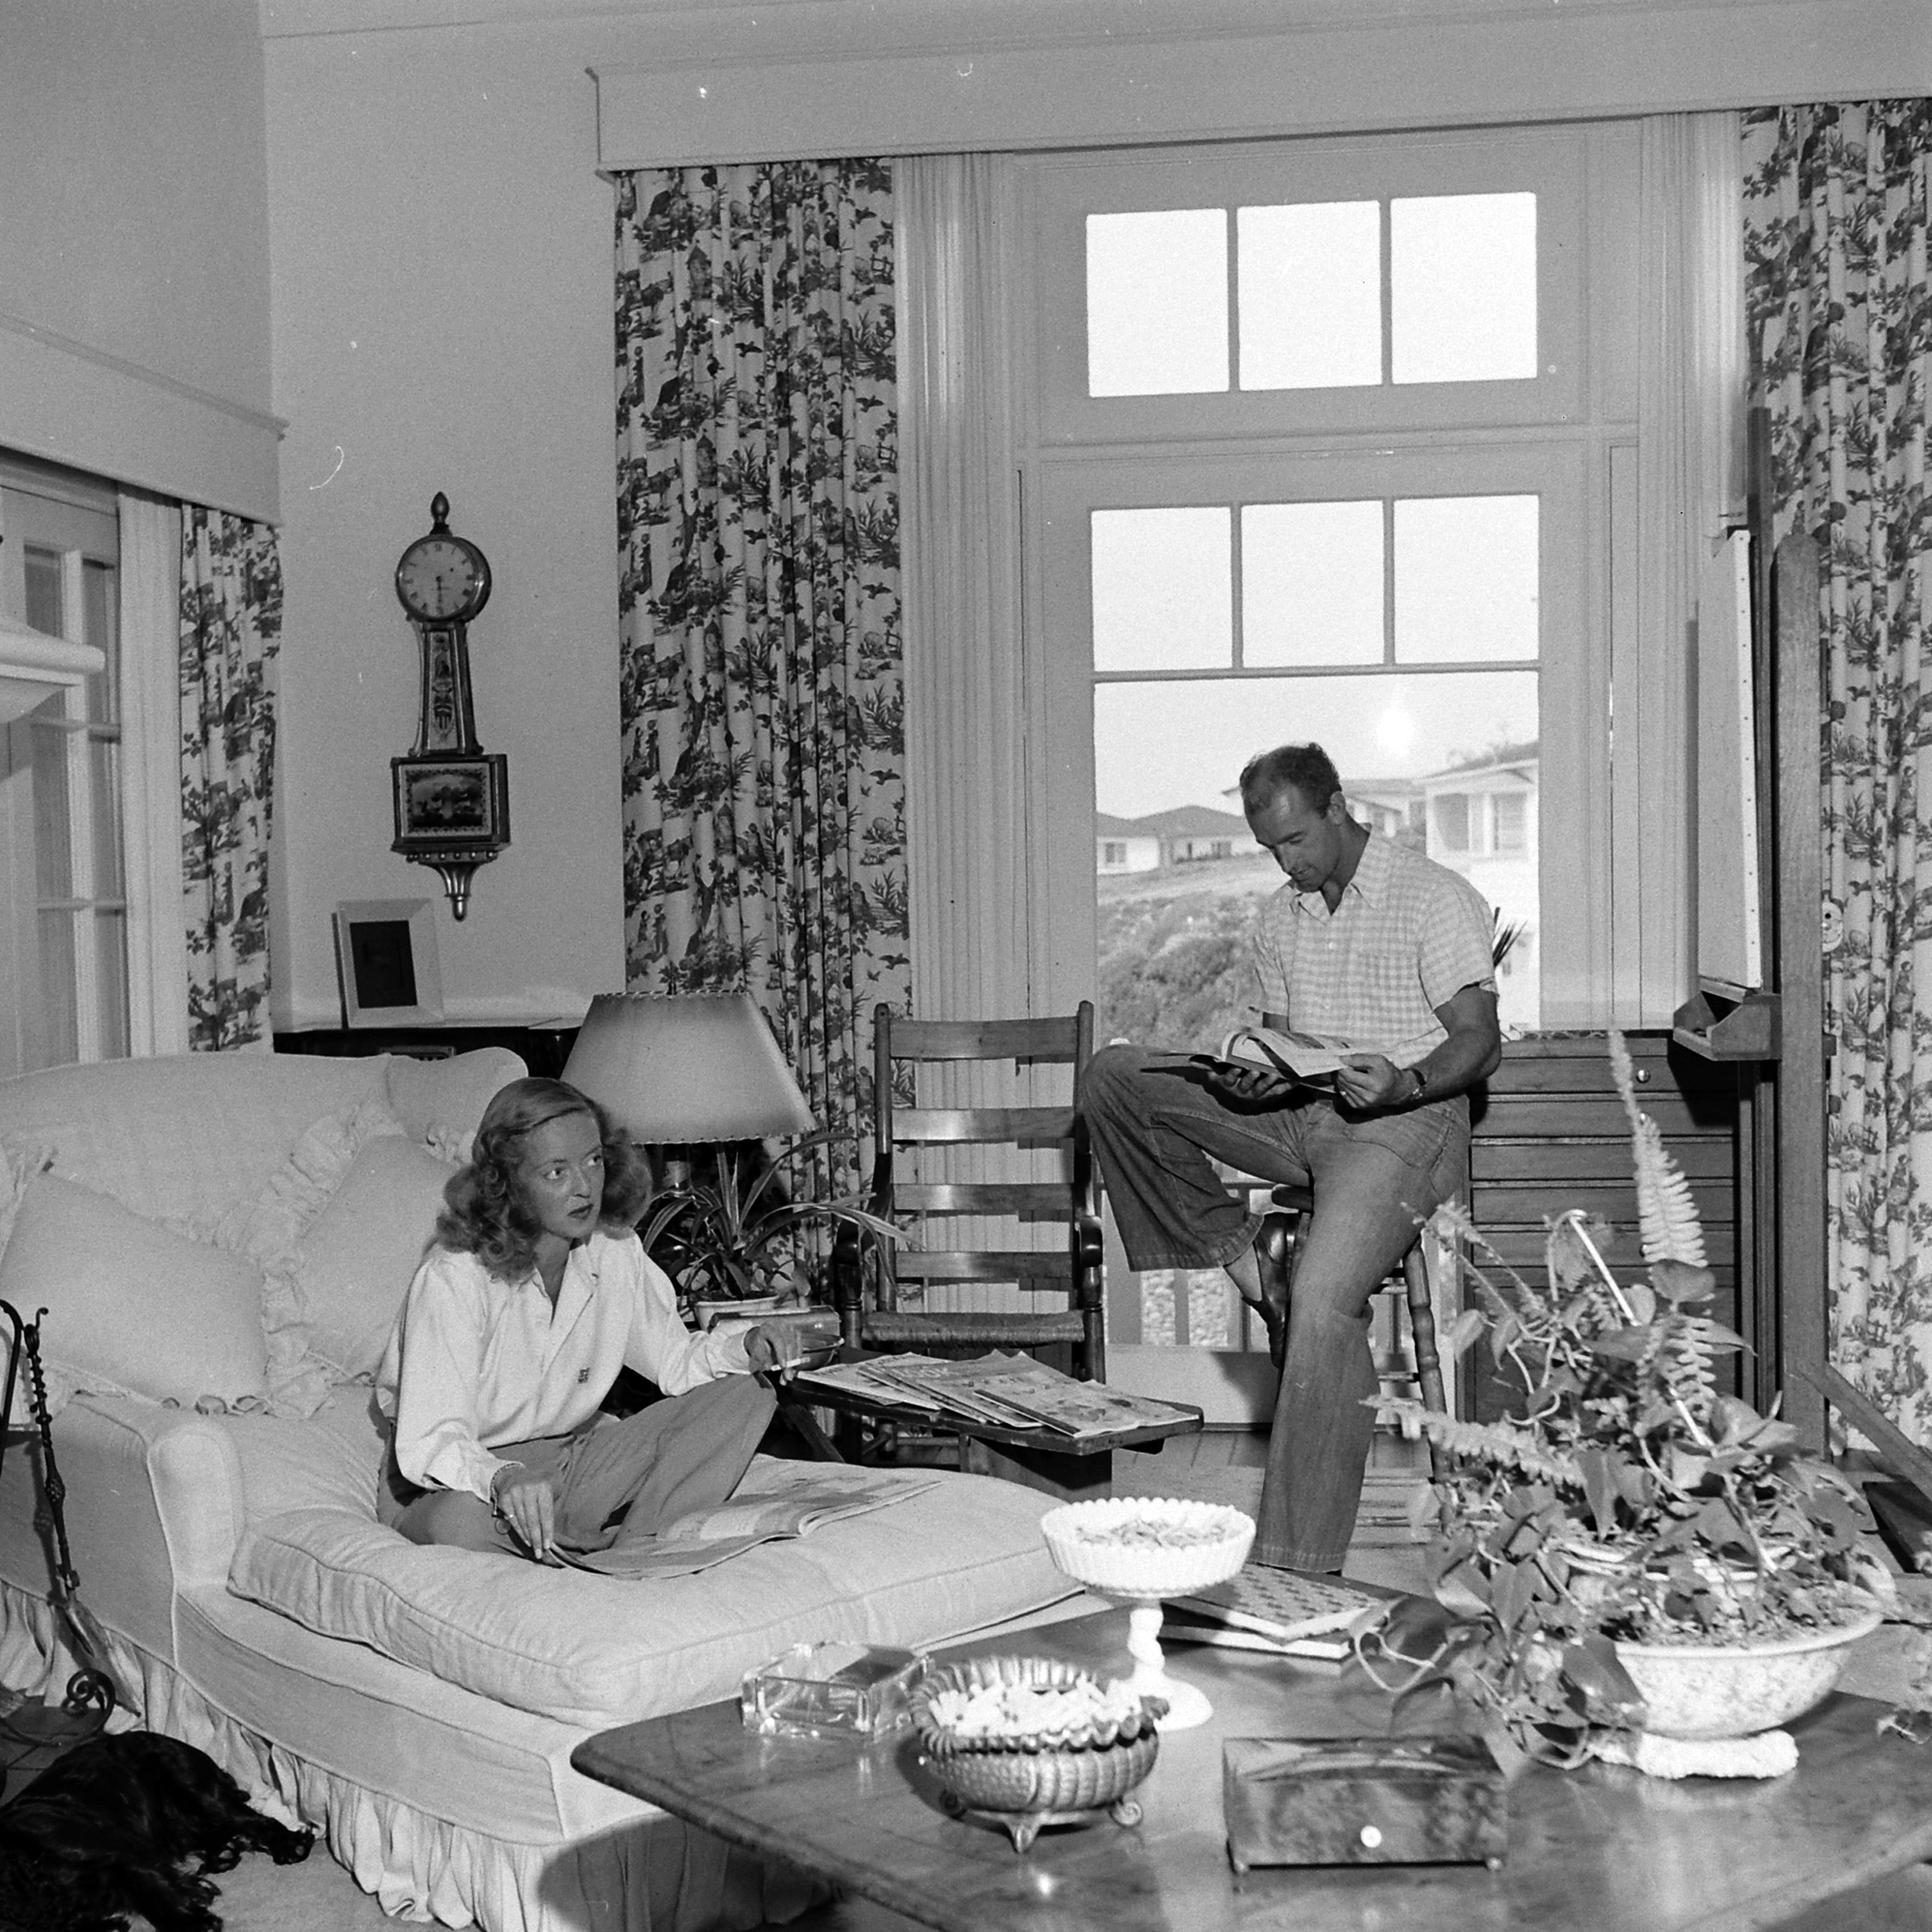 Bette Davis and her third husband, William Grant Sherry at home in California, 1947.